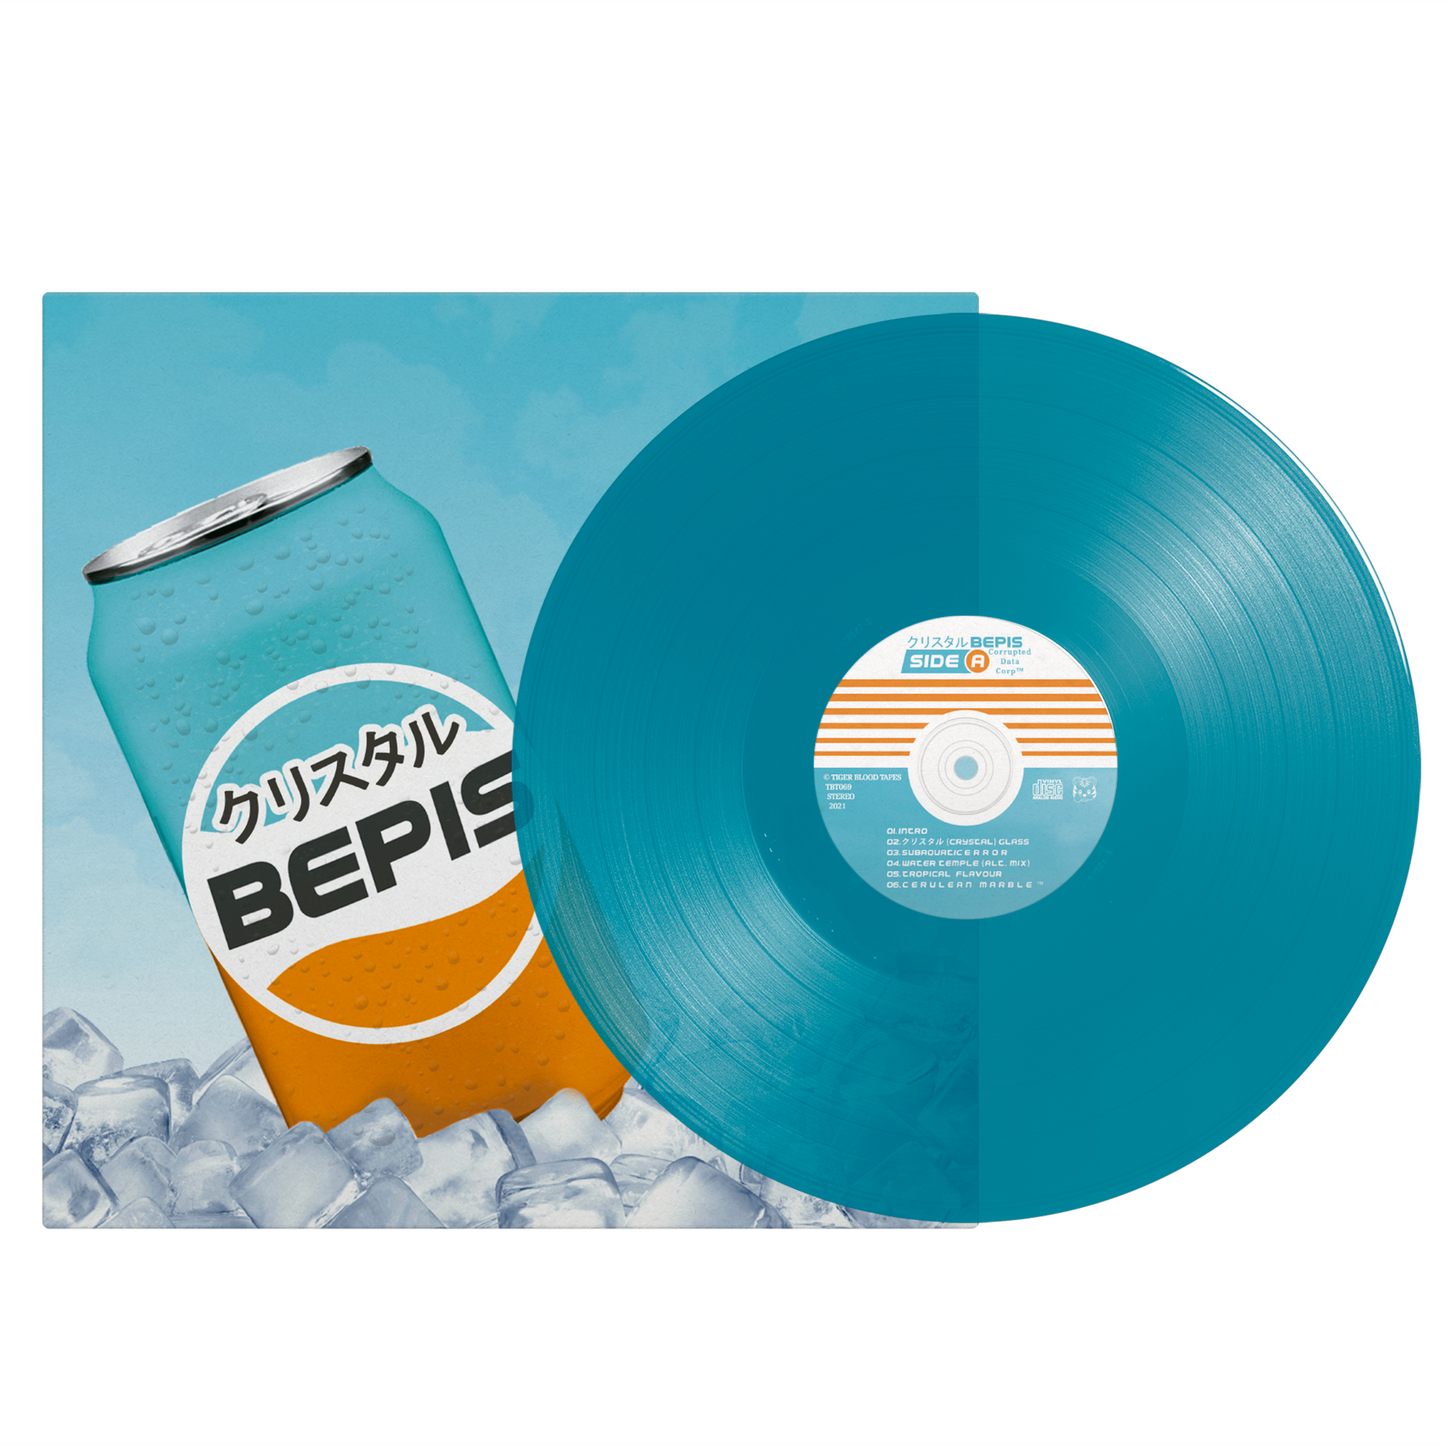 Corrupted Data Corp - "BEPIS" Limited Edition Freeze Blue Vinyl LP